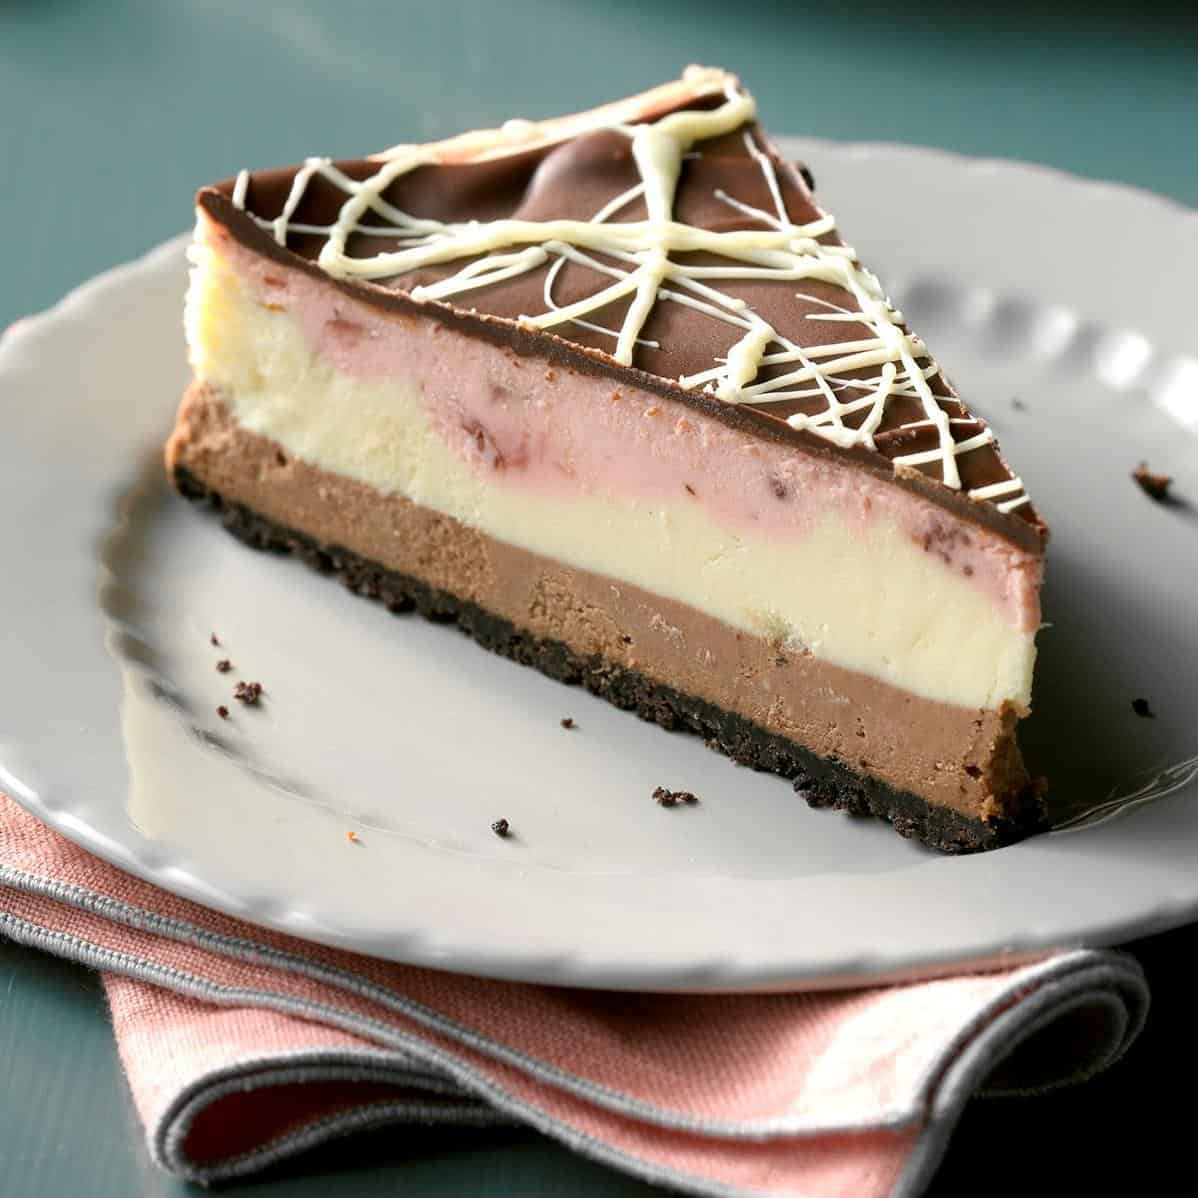  A cheesecake so good, it will make you forget about all other desserts.